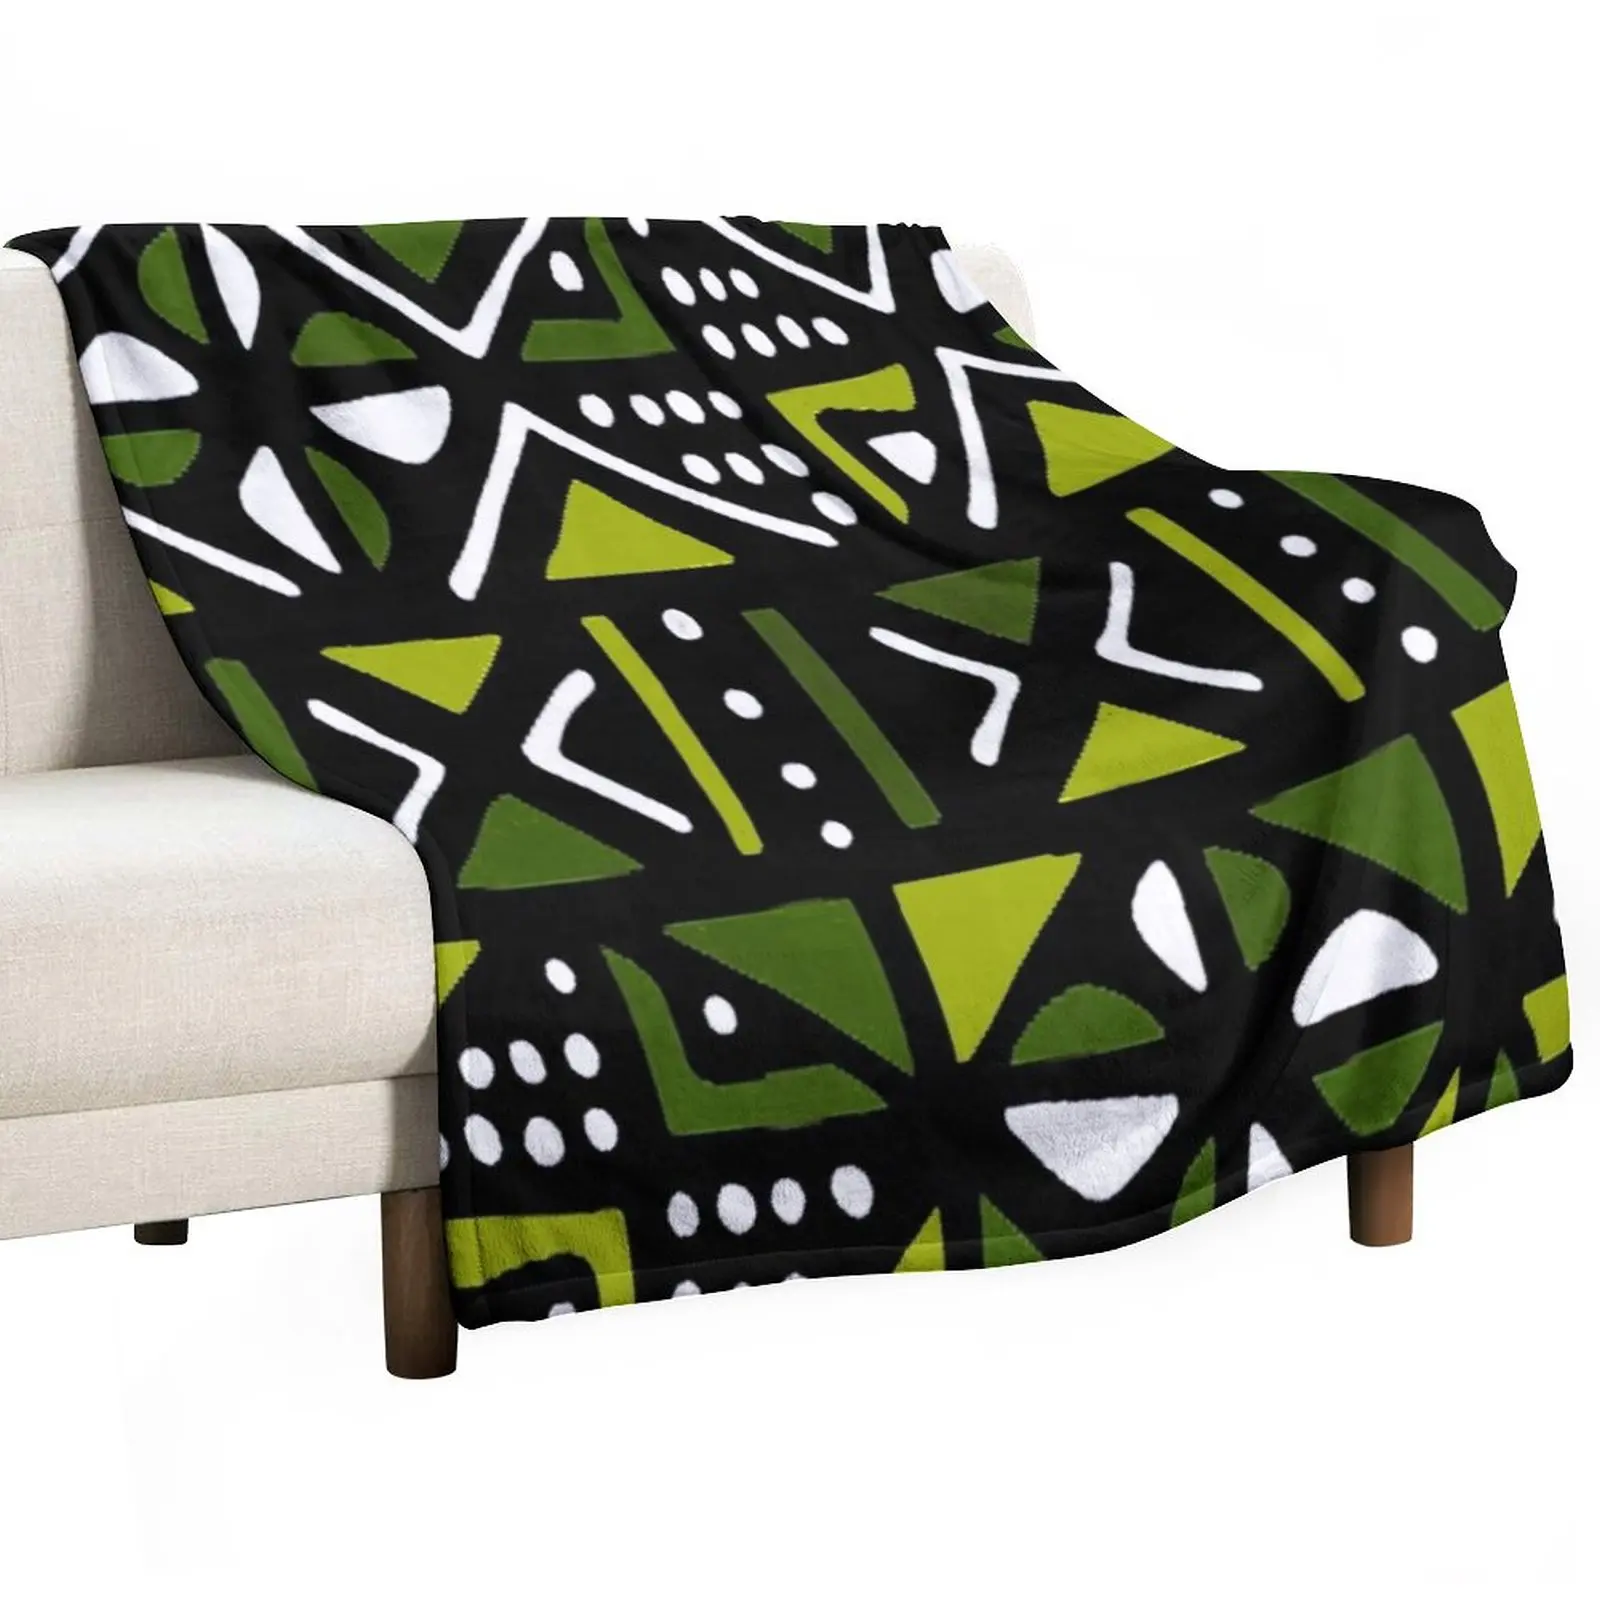 Lime green mudcloth african tribal print throw blanket blanket fluffy thermal blankets for travel